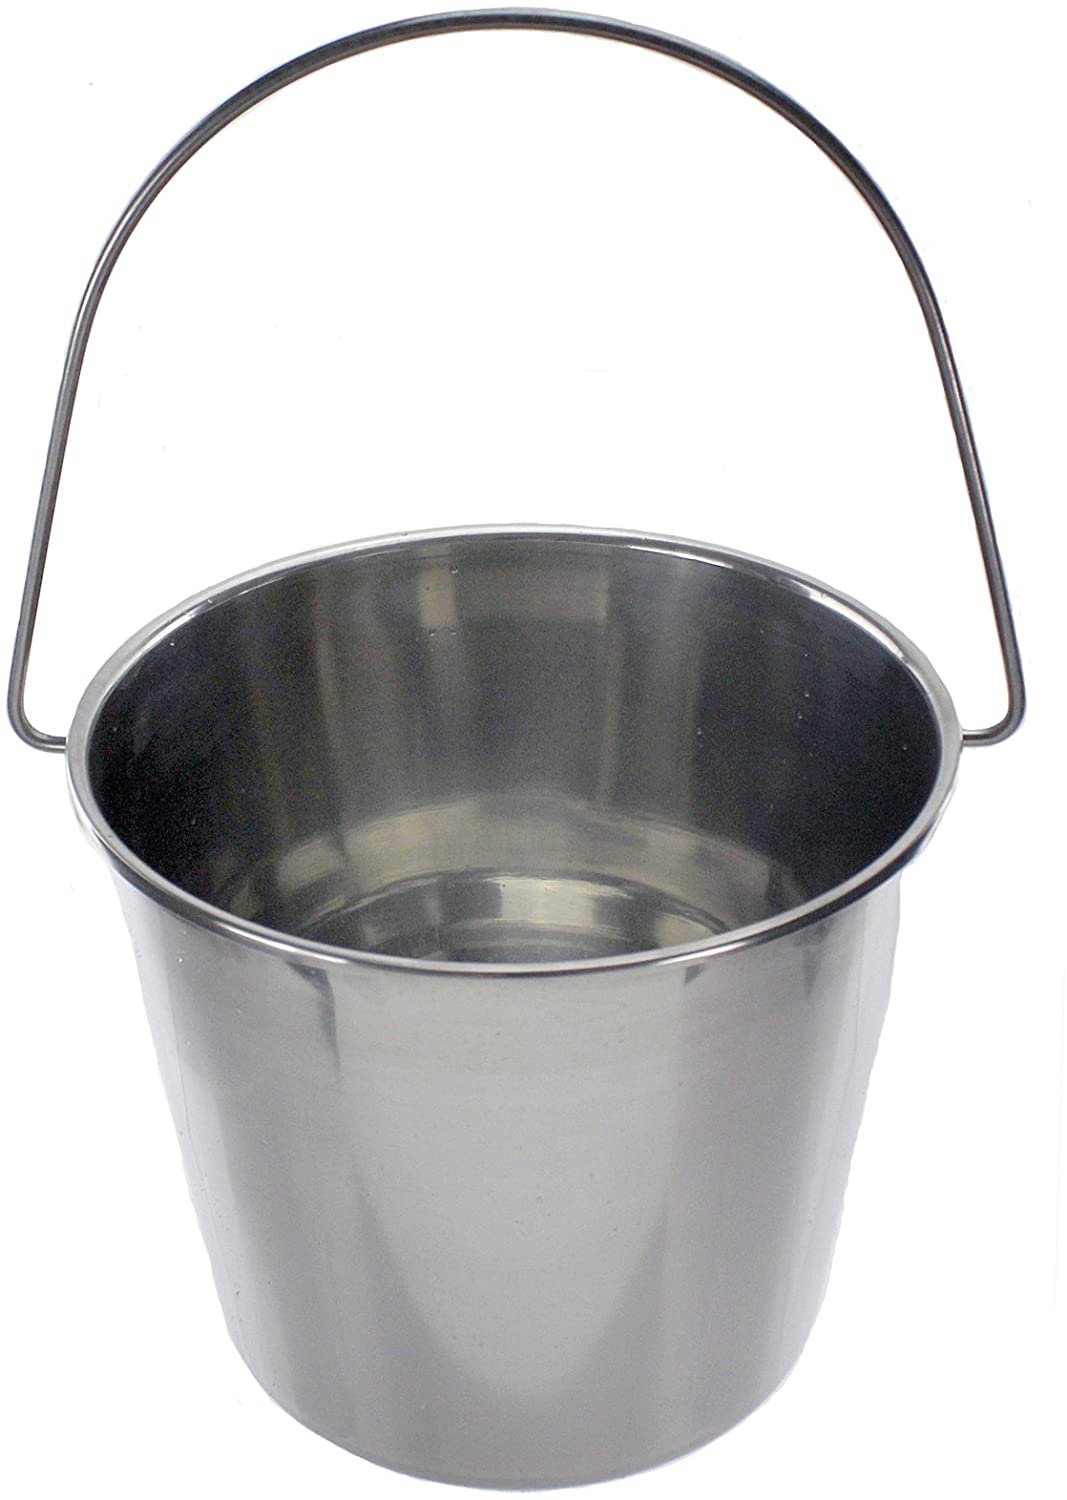 12 Litre Stainless Steel Handled Pail Bucket for Champagne & Ice (Silver, Pack of 5 Buckets)